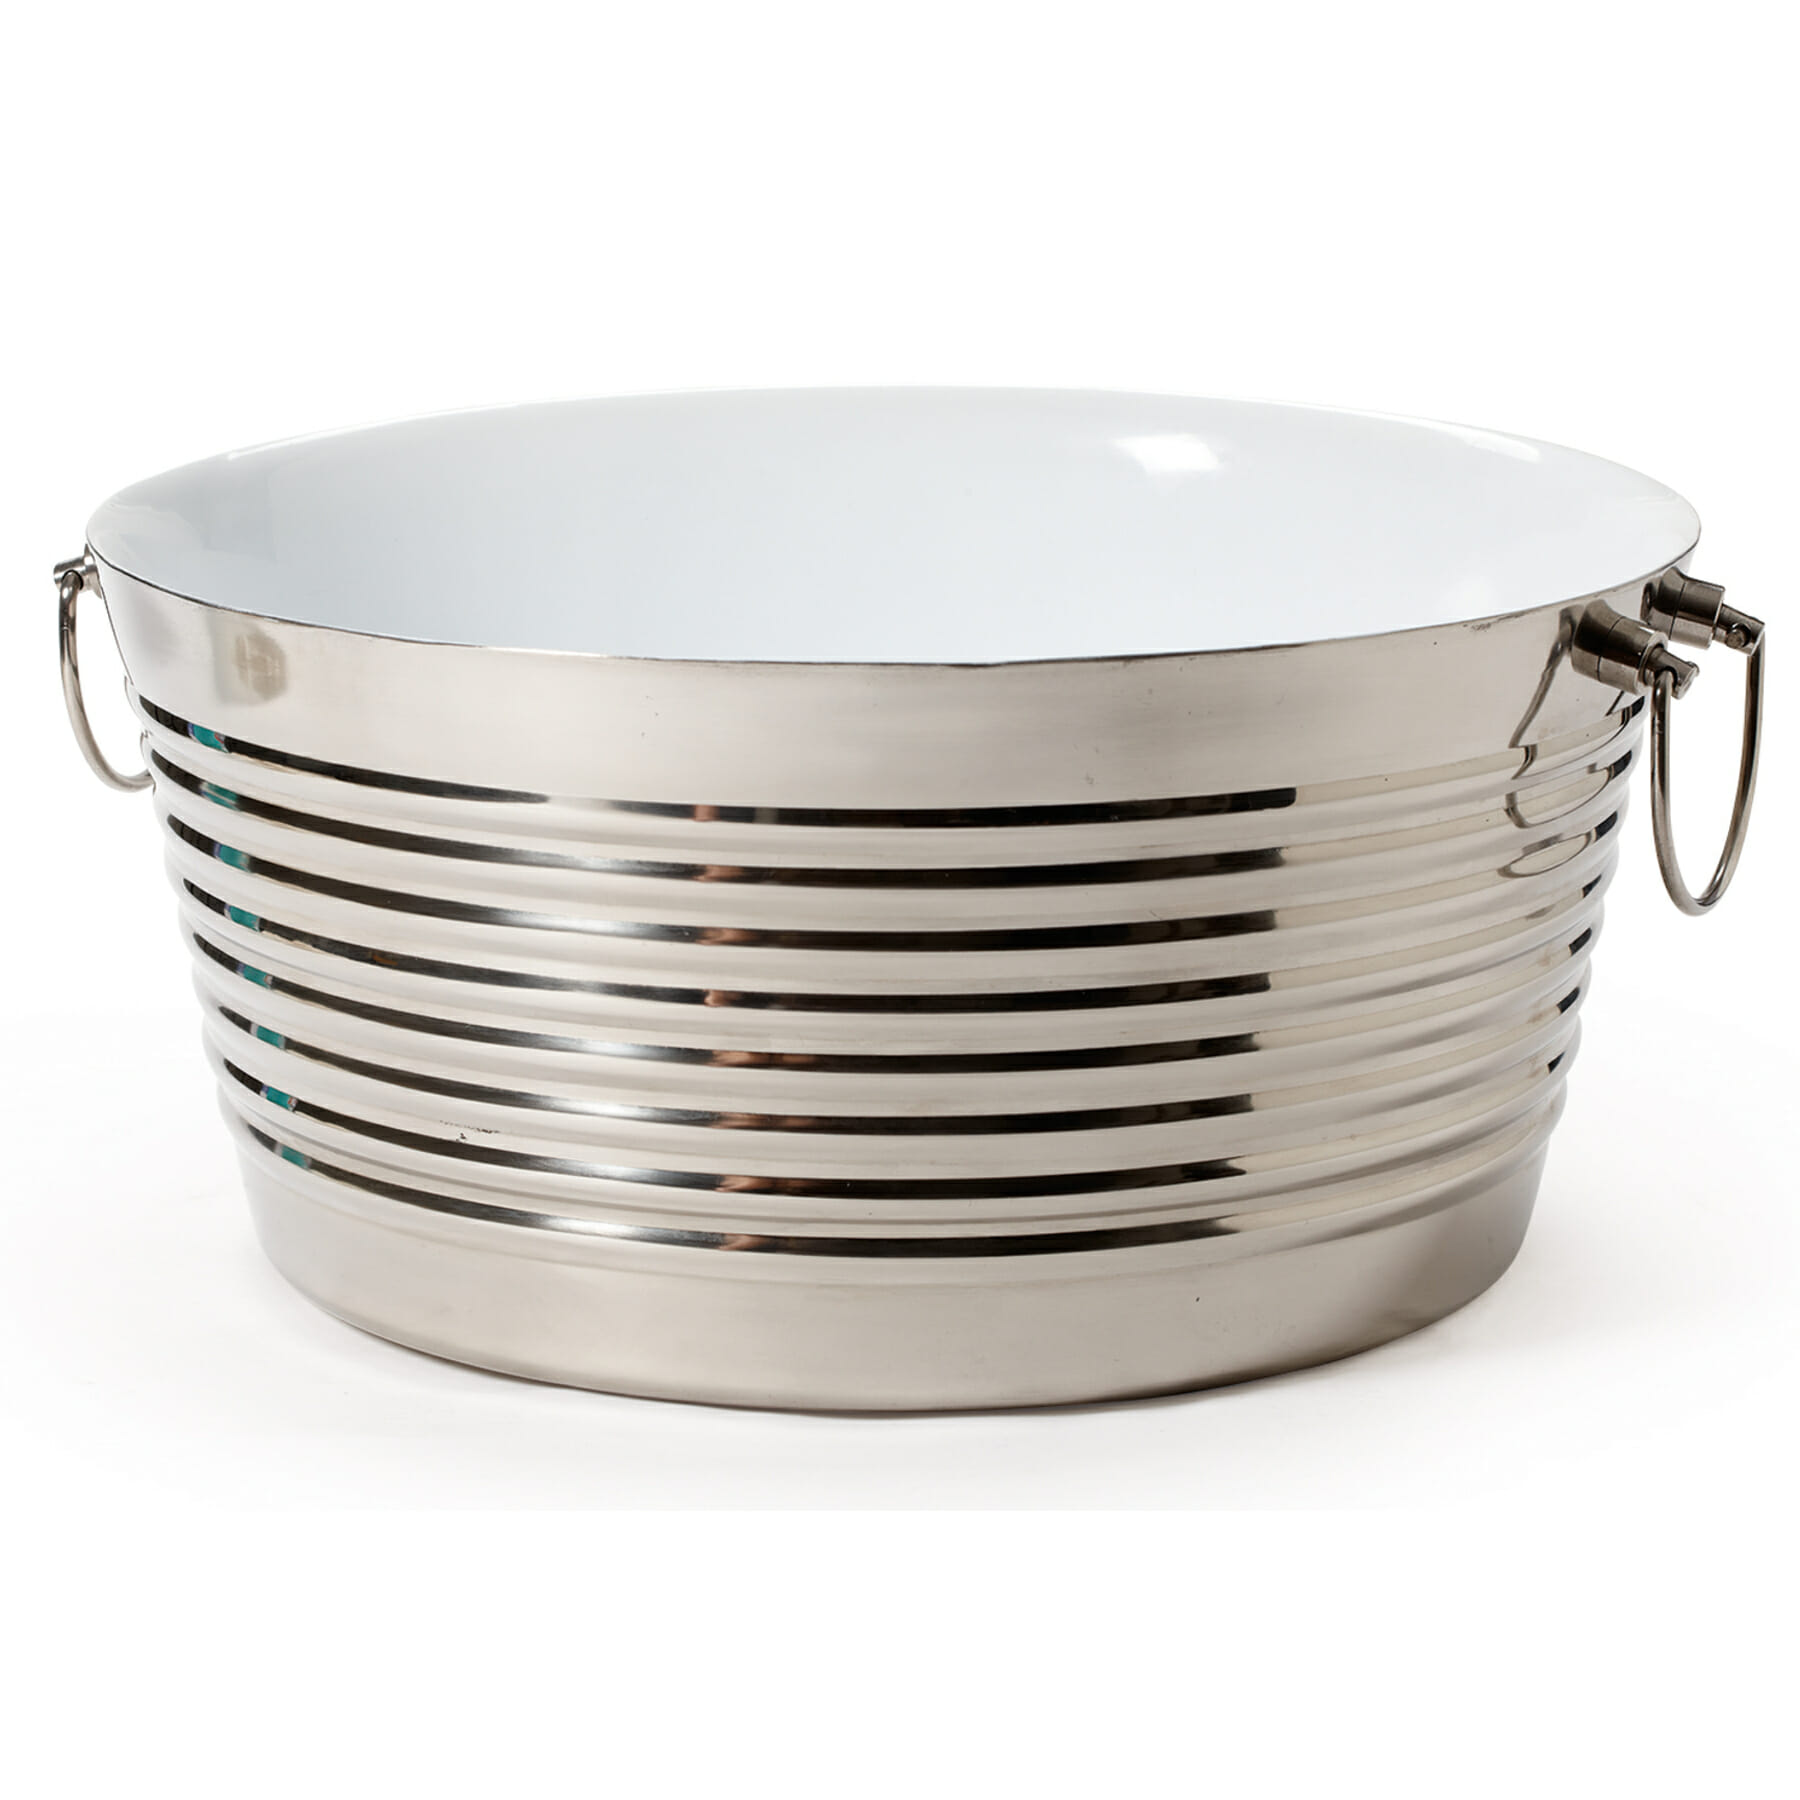 3 gal., 14.75" Dia. Round Double Wall Stainless Steel Beverage Tub with White Coated Interior (21" with Handles), 7" tall